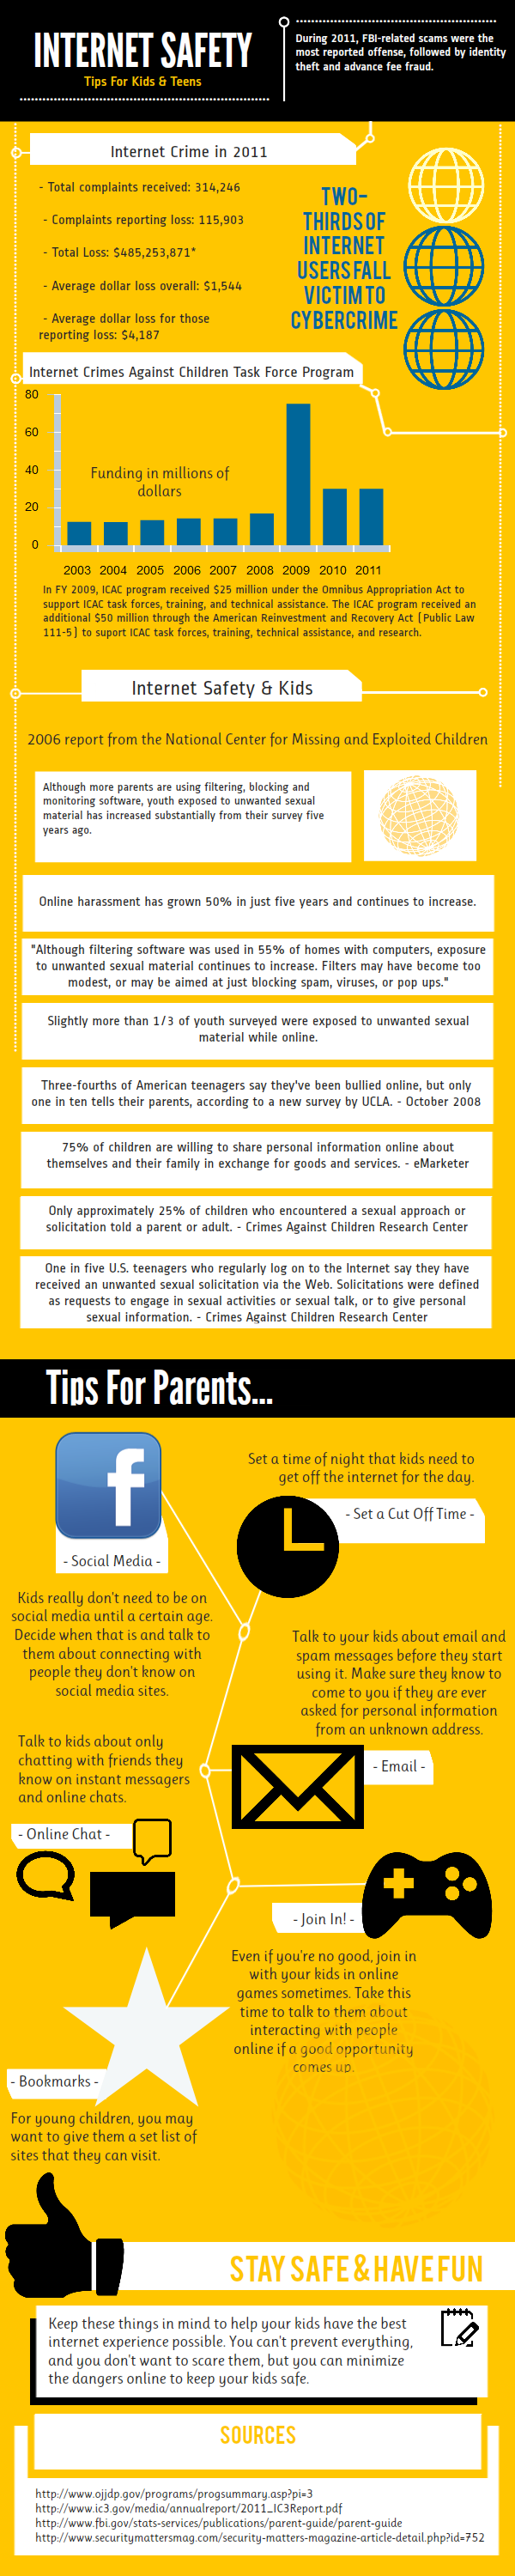 Infographic: Internet Safety For Kids